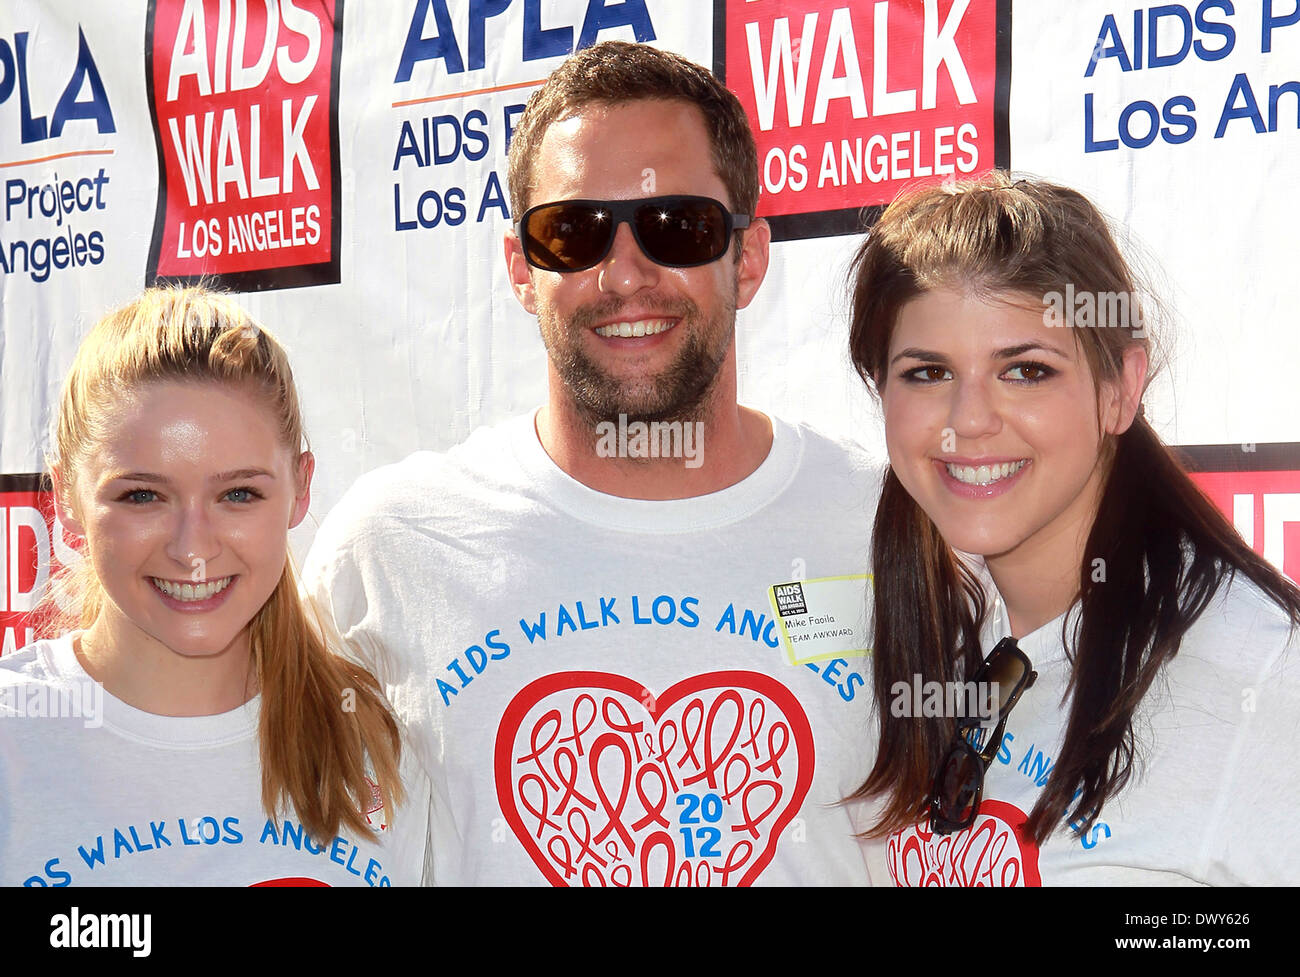 Mike Faiola, Greer Grammer, Molly Tarlov 28th Annual AIDS Walk Los Angeles in West Hollywood Los Angeles, California - 14.10.12 Featuring: Mike Faiola, Greer Grammer, Molly Tarlov Where: West Hollywood, California, United States When: 14 Oct 2012 Stock Photo